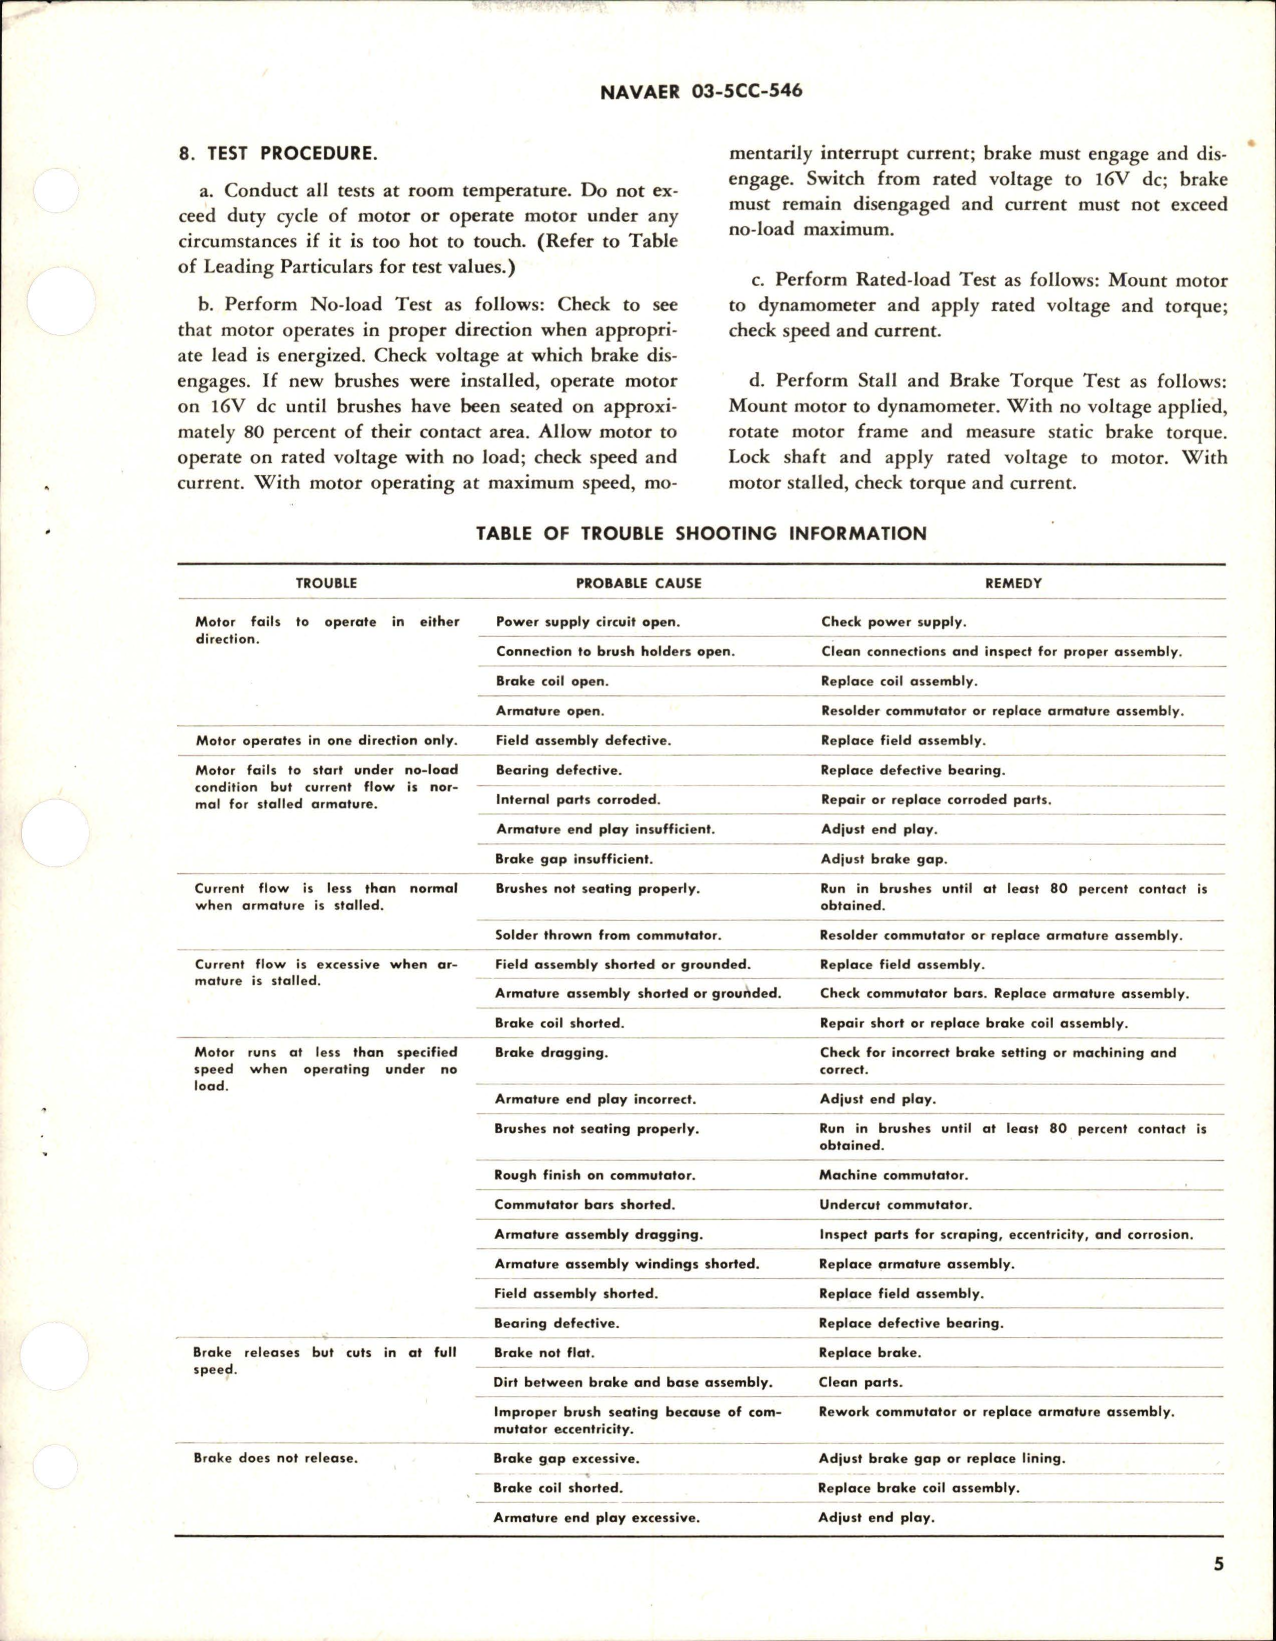 Sample page 5 from AirCorps Library document: Overhaul Instructions with Parts Breakdown for Direct Current Motor - Part 26900-2